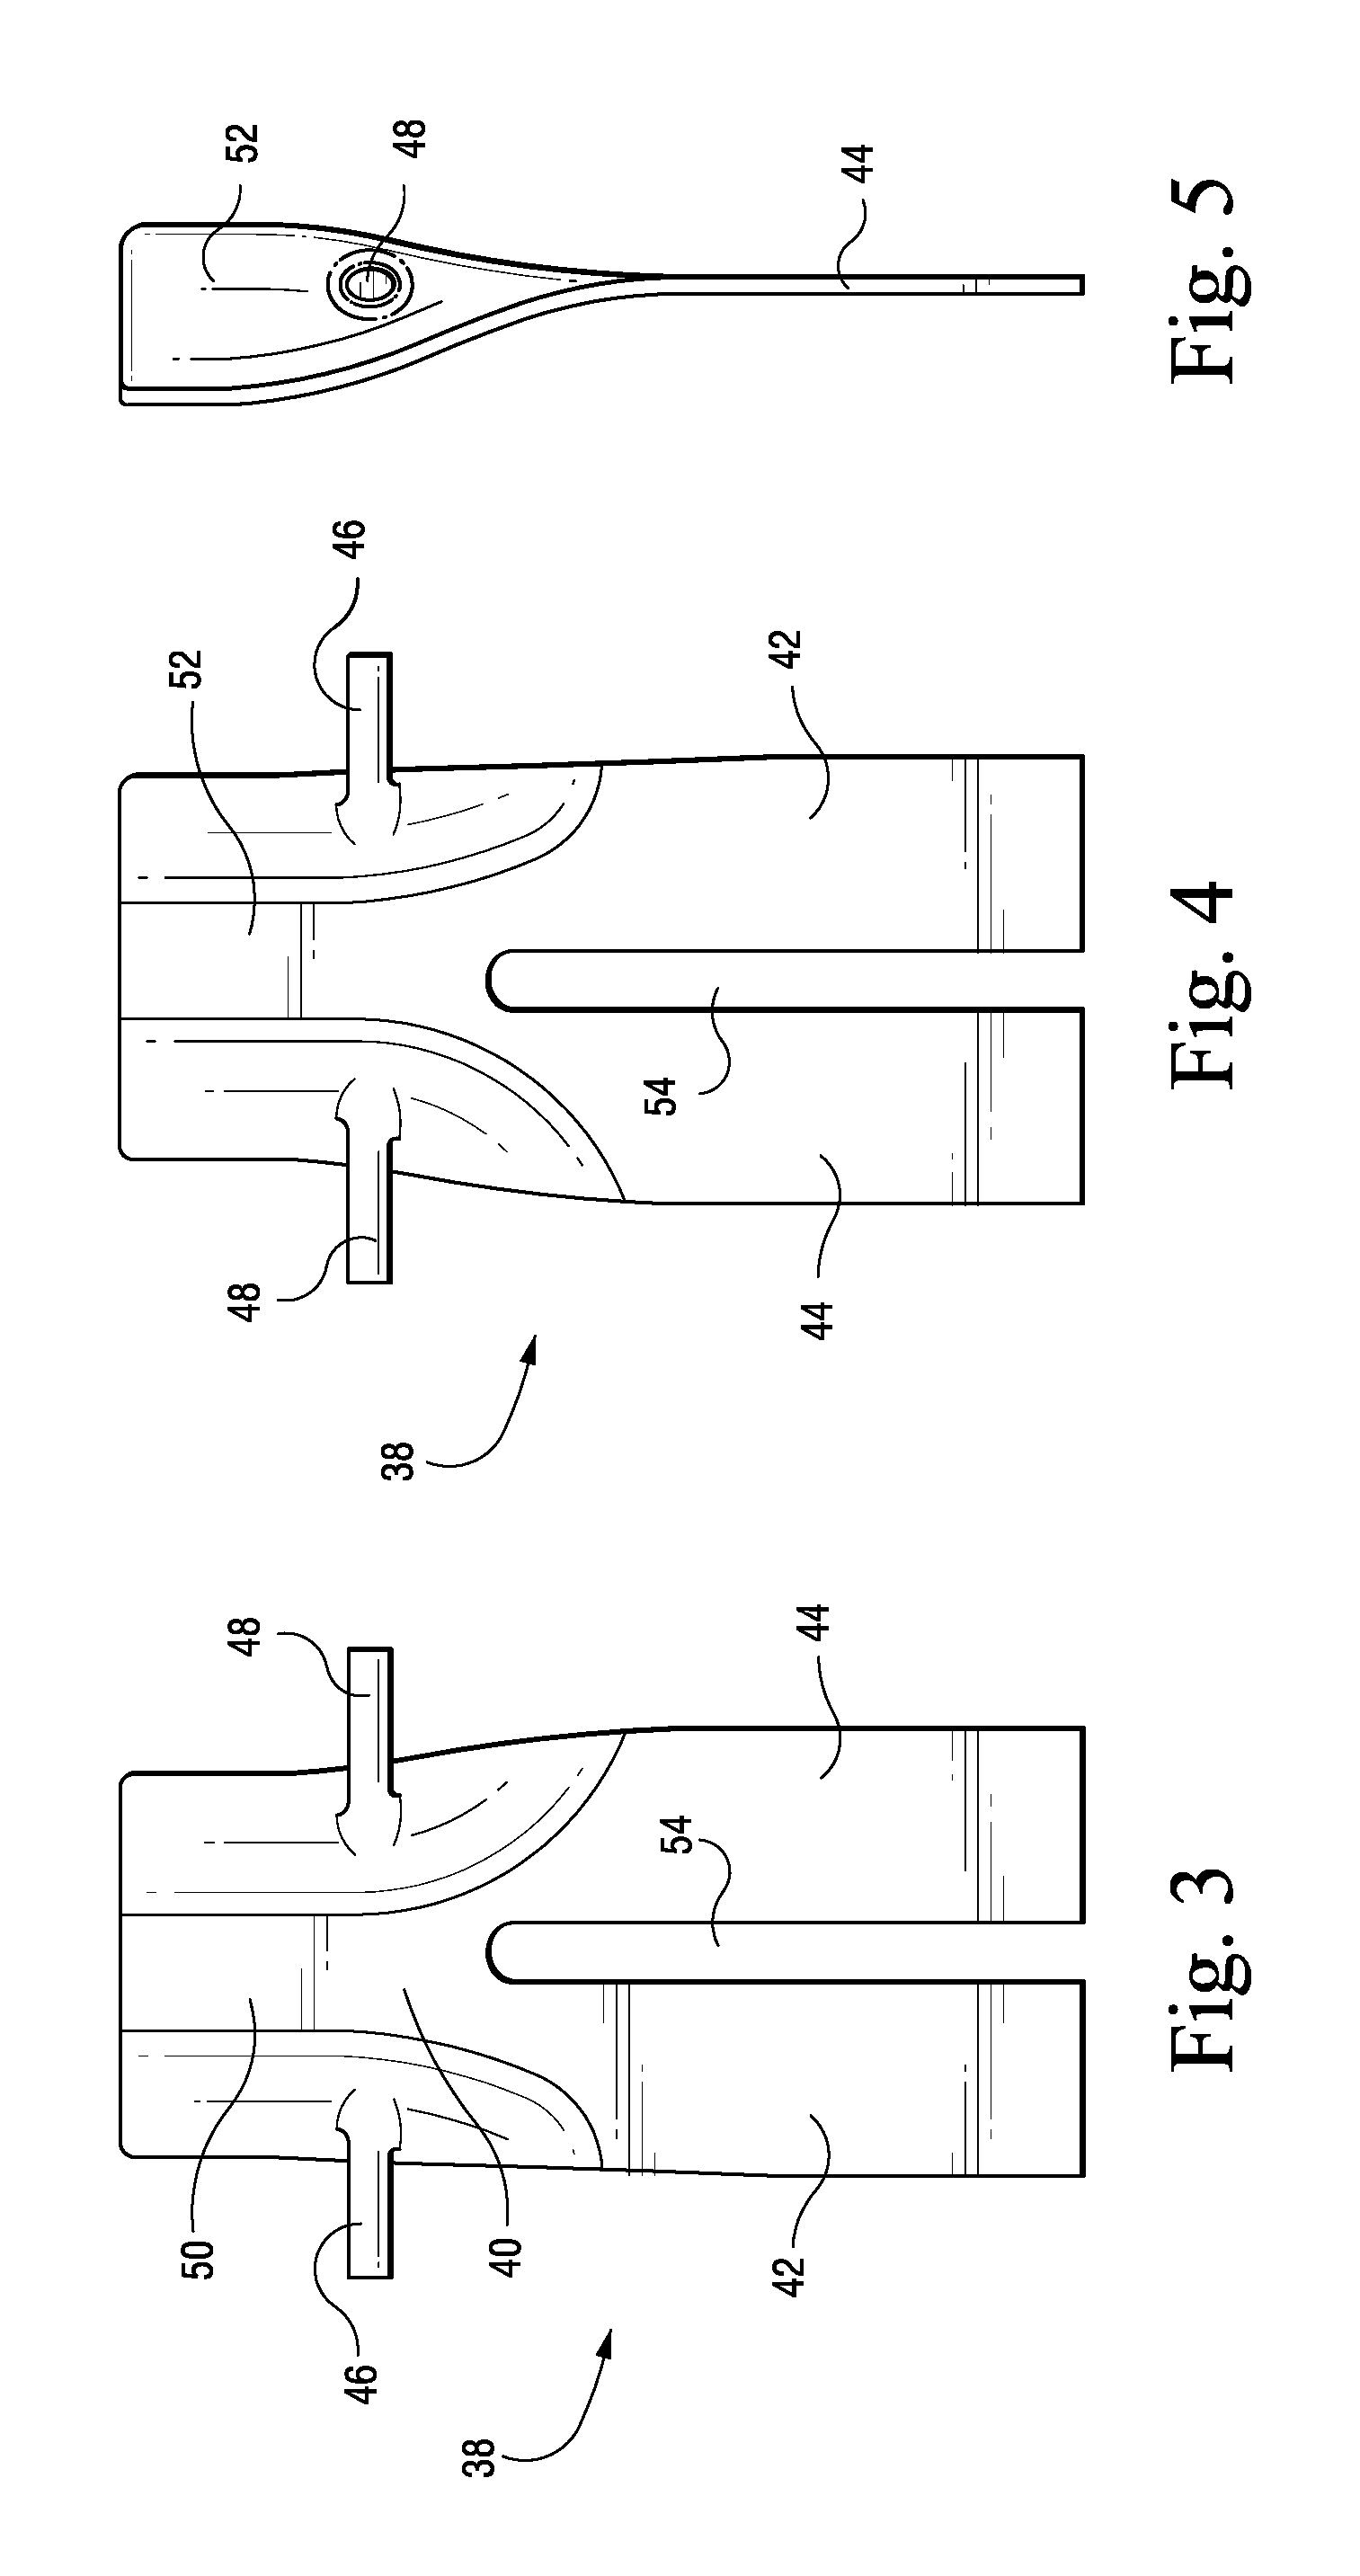 Perimeter-cooled stage 1 bucket core stabilizing device and related method